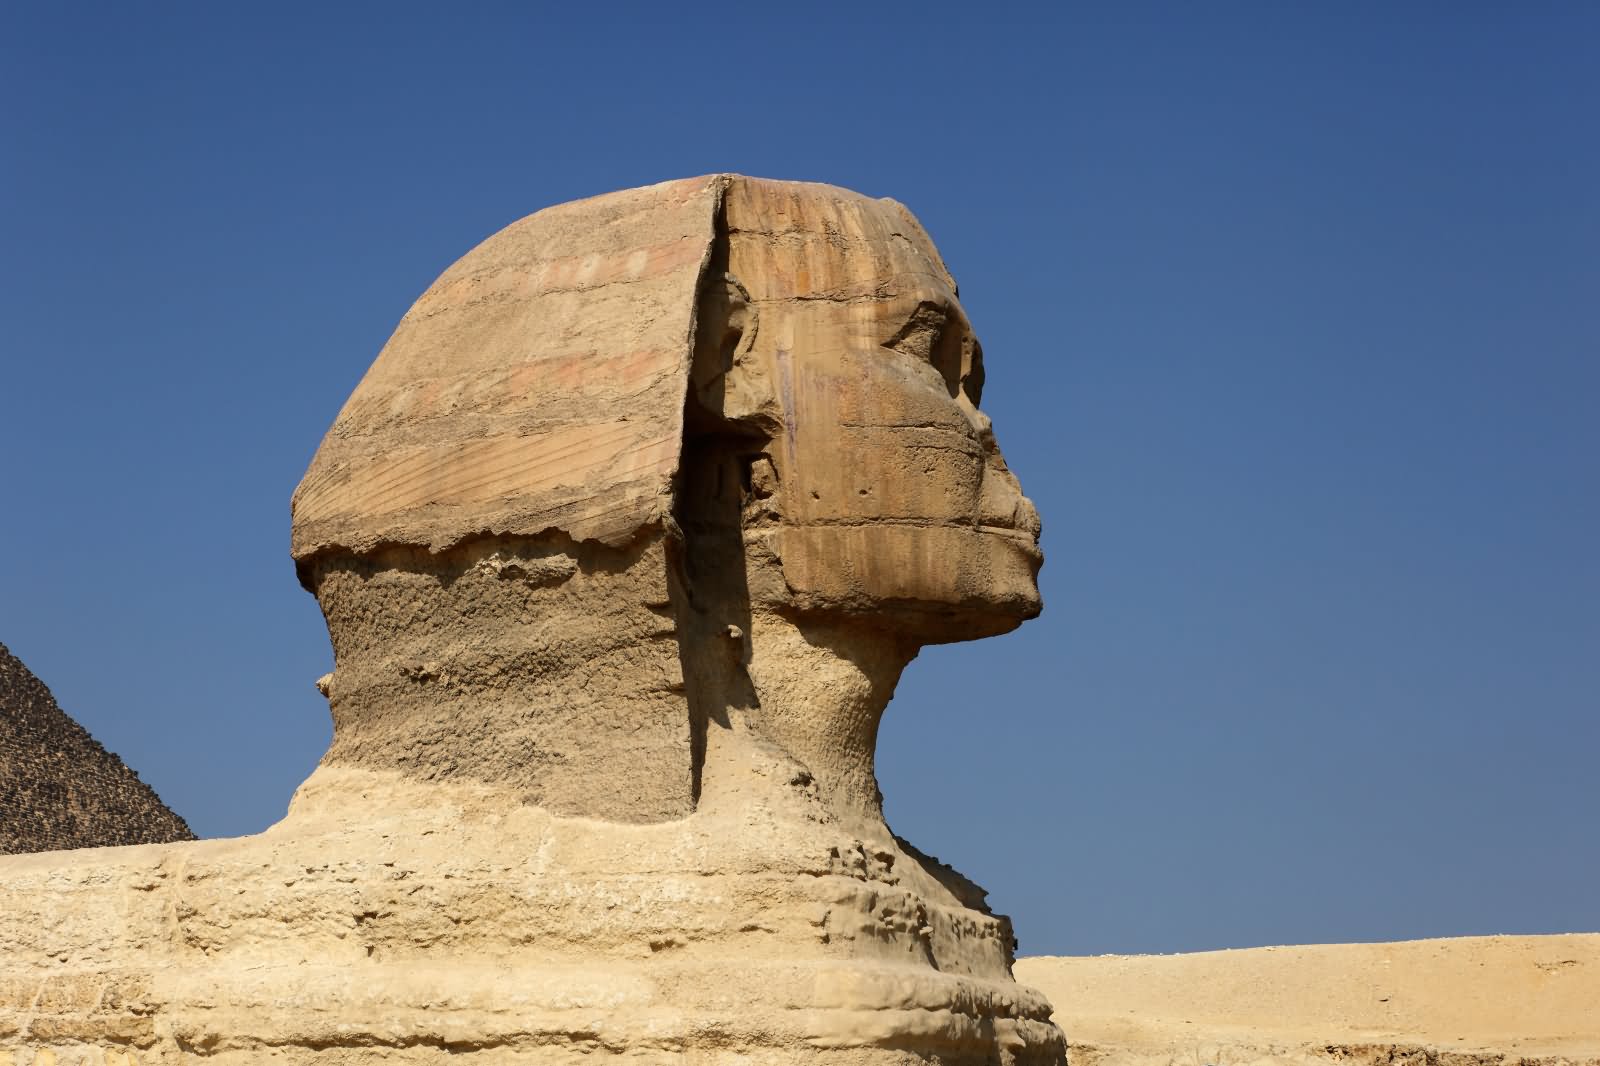 Side View Of The Great Sphinx of Giza